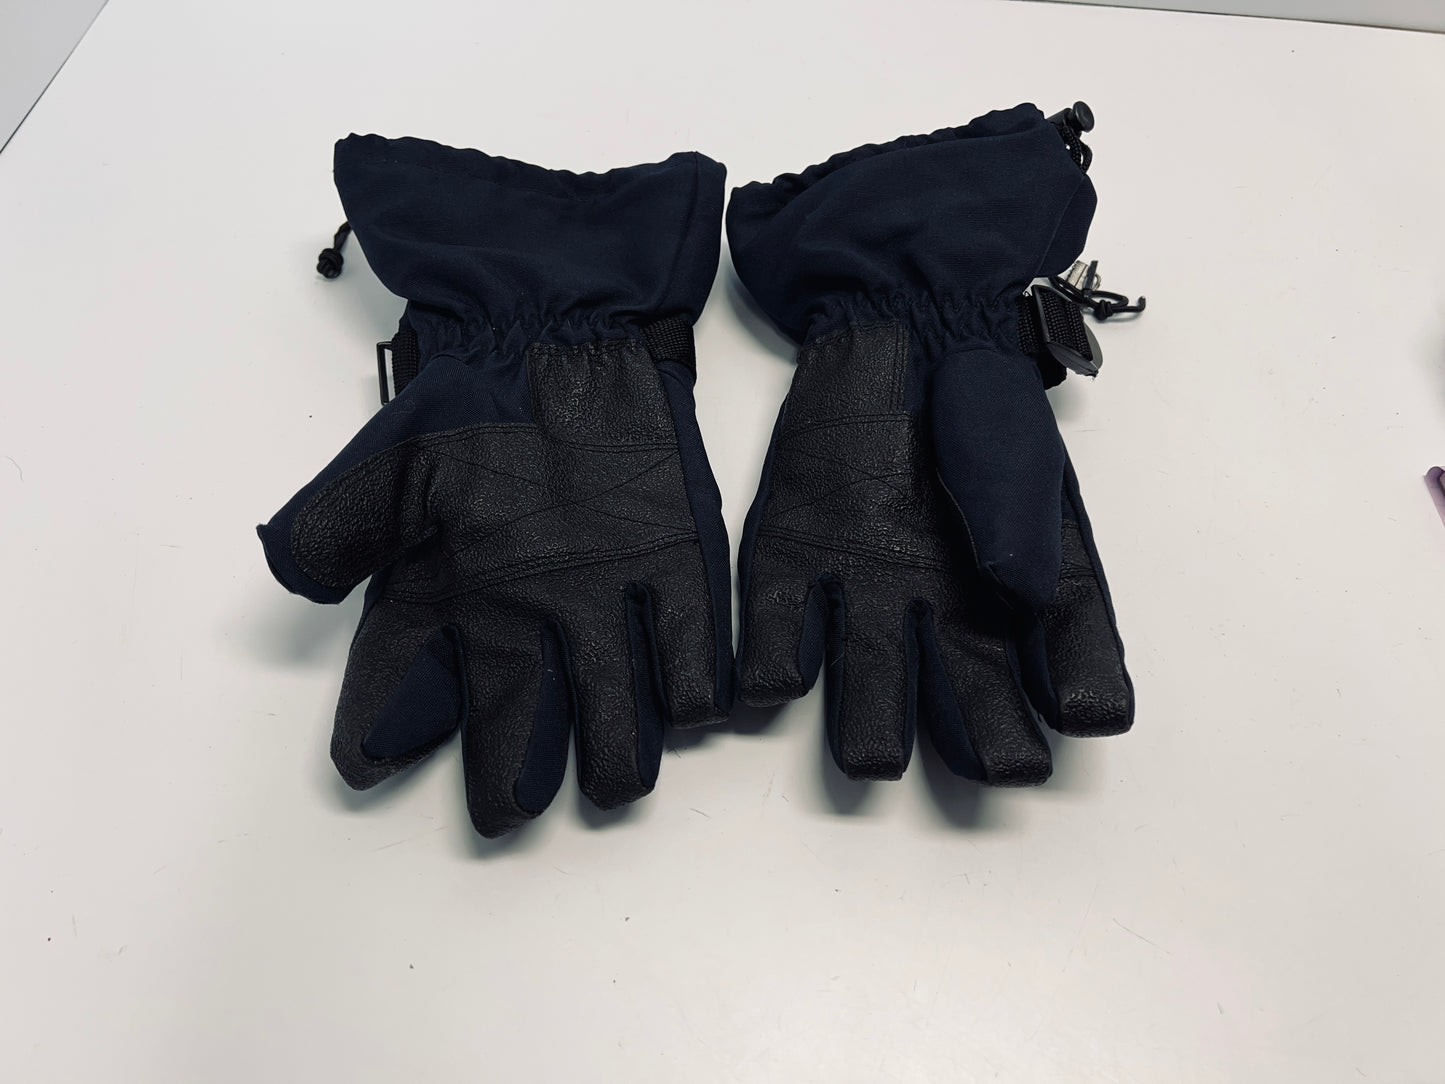 Winter Gloves Mitts Men's Size M-L With Liner Marine Blue